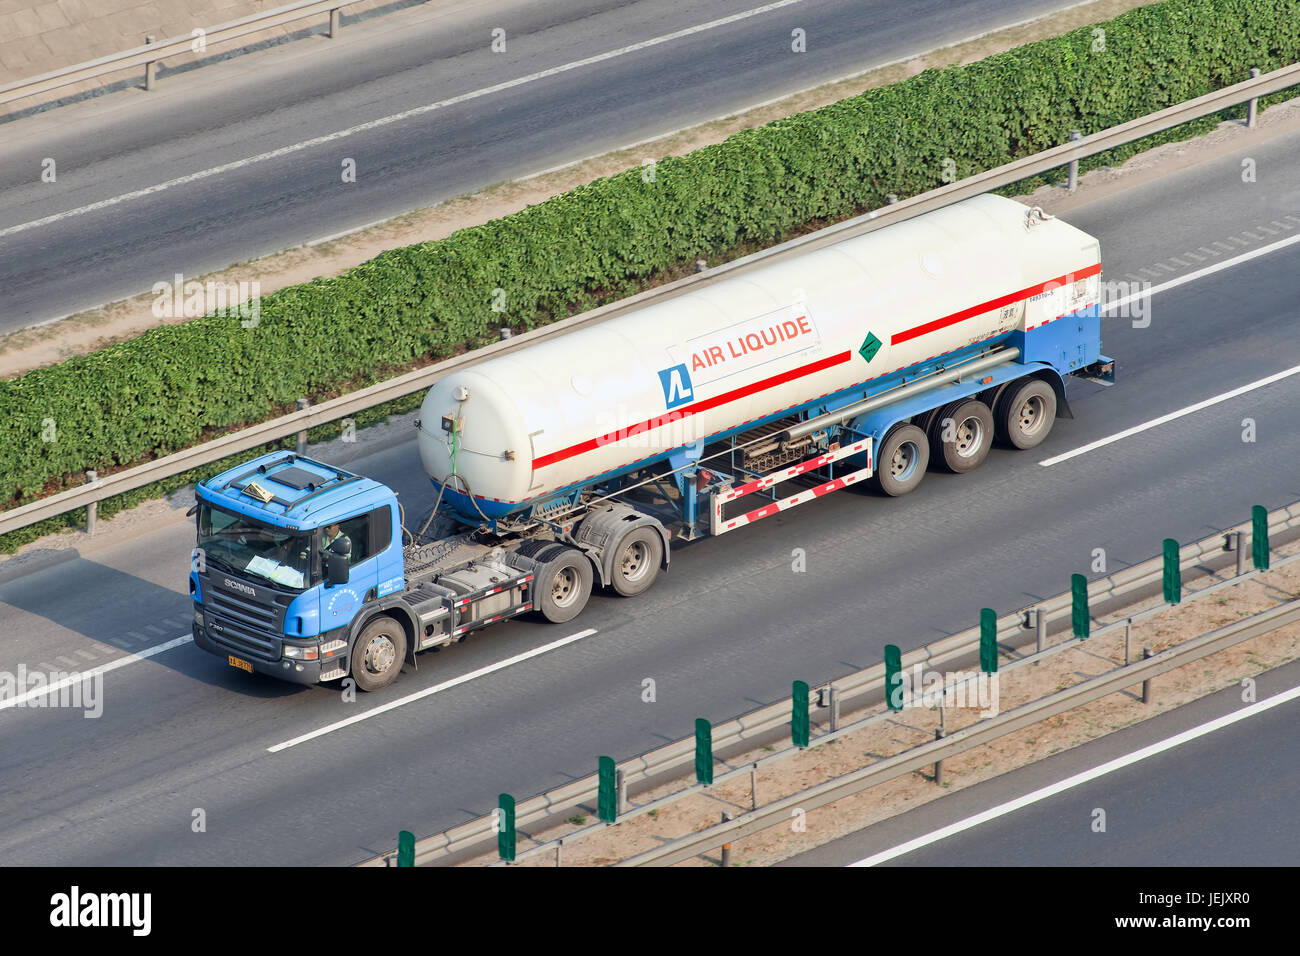 BEIJING-APRIL 17, 2013. Air Liquide liquid gas transport. French multinational, world's second largest supplier of industrial gases. Stock Photo